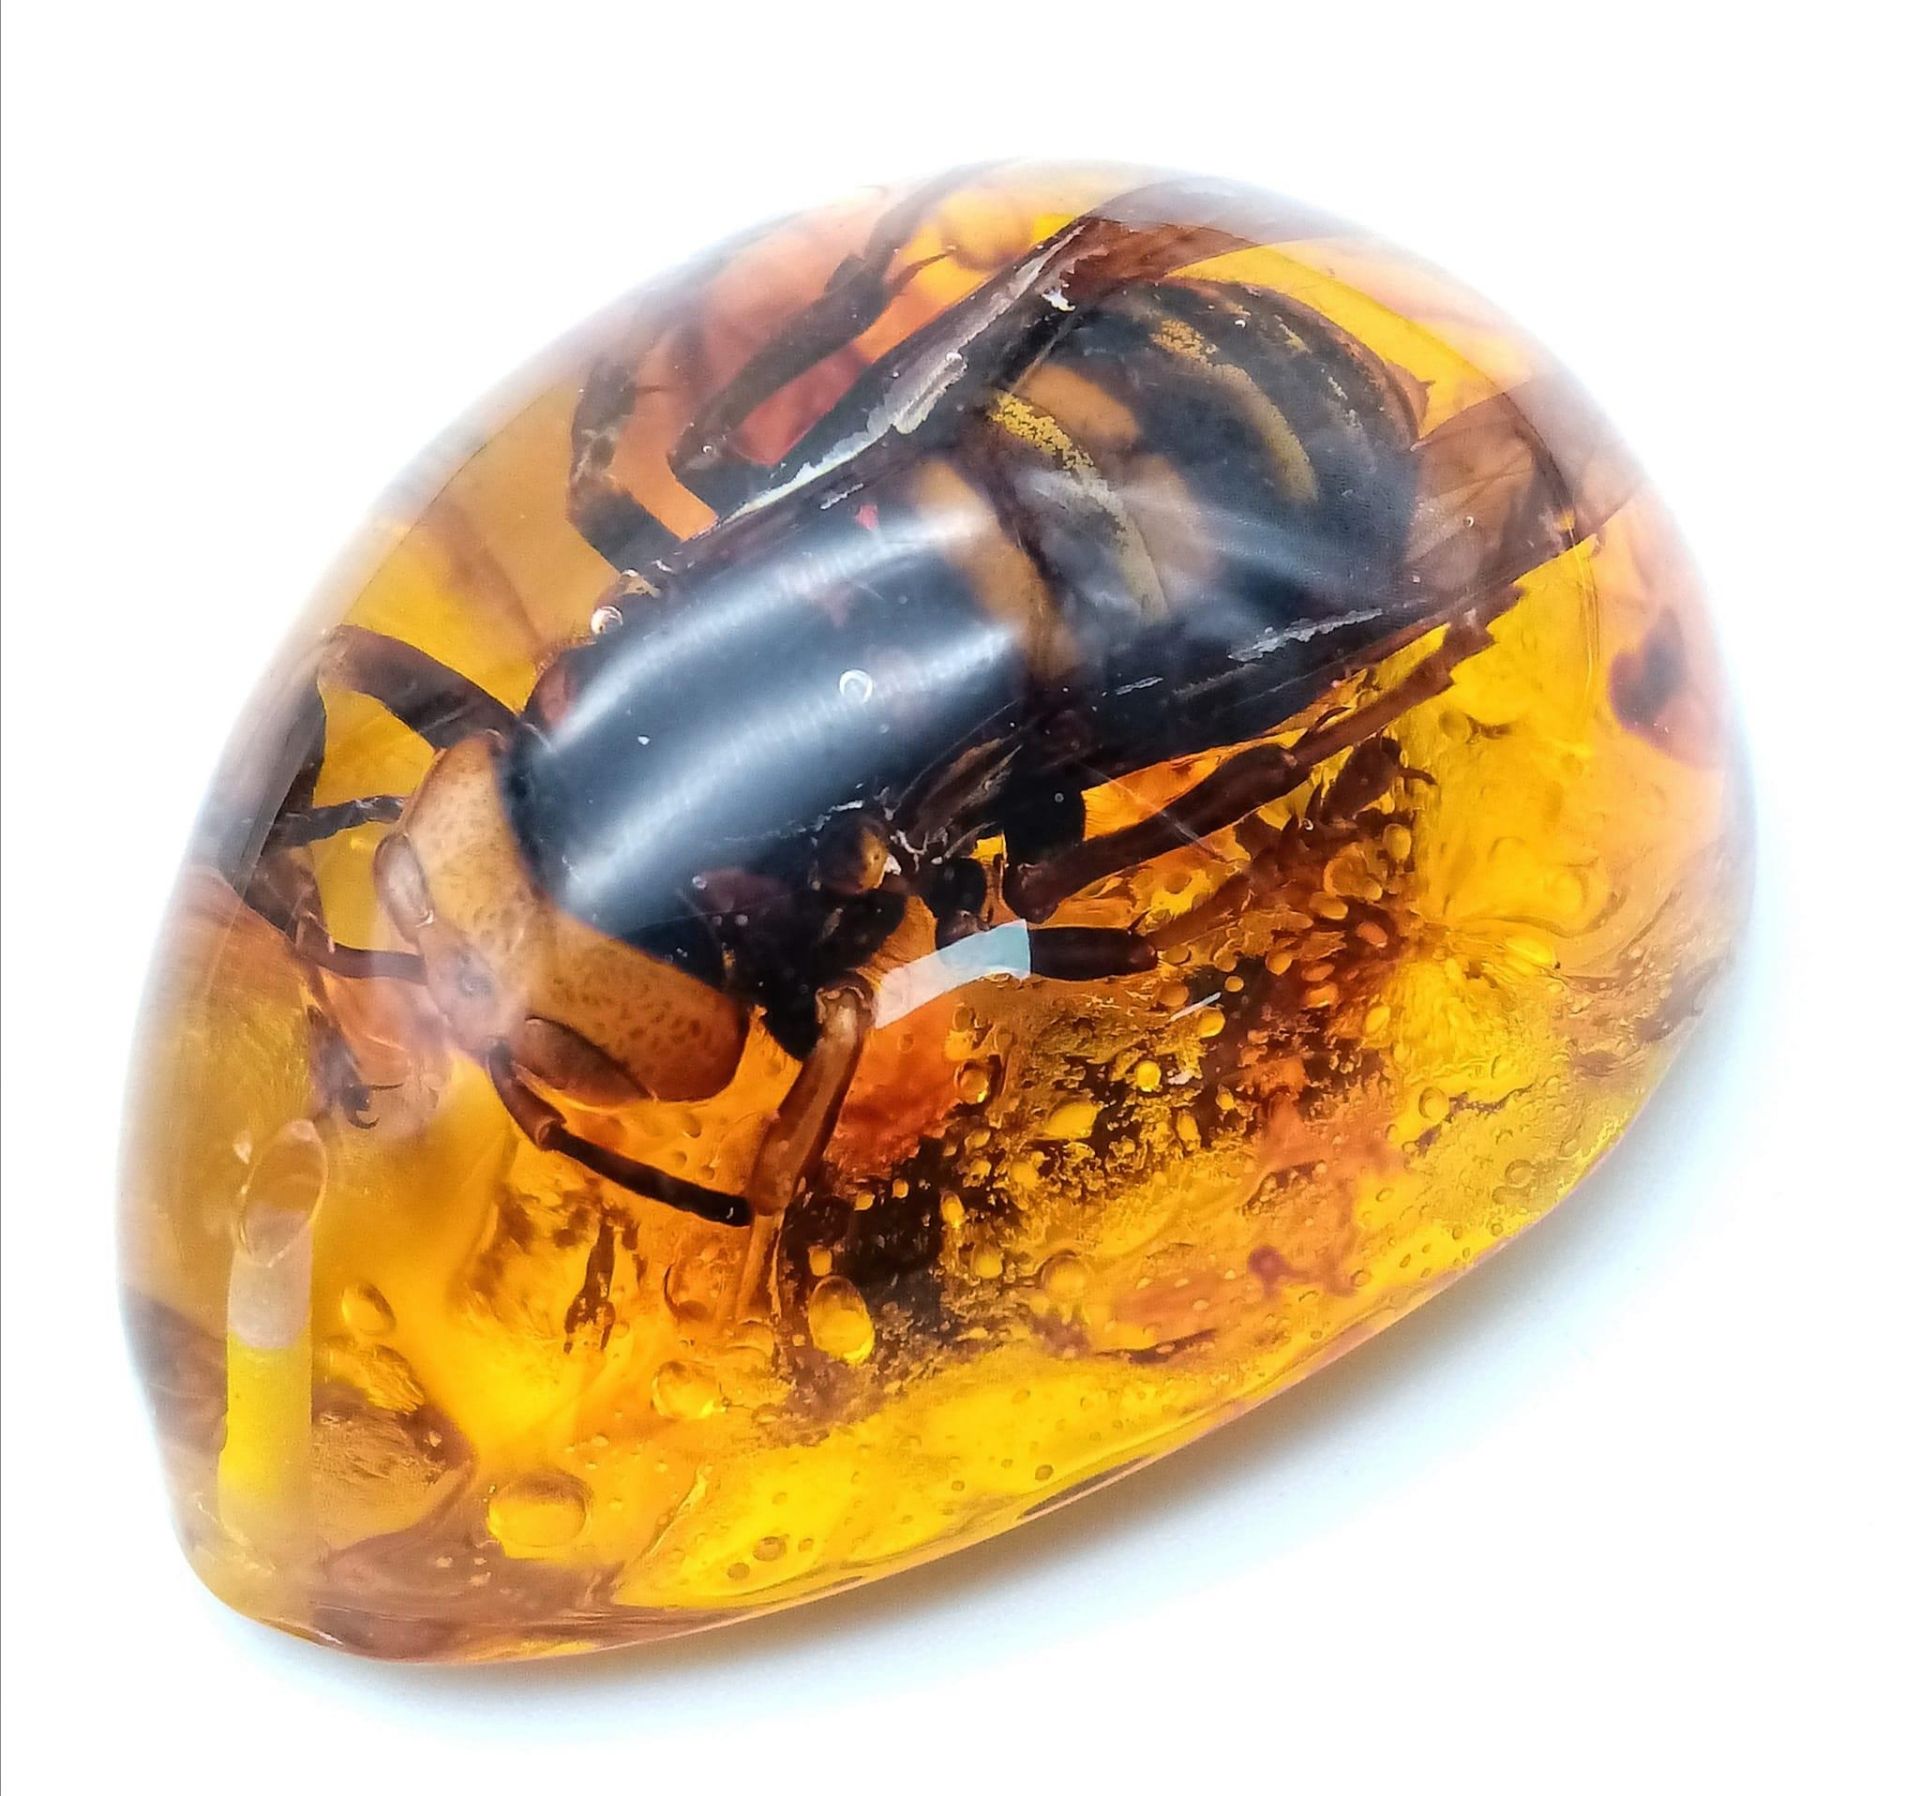 An Extremely Large Hornet Who Does Not Look Best Pleased With His Current Predicament. Pendant or